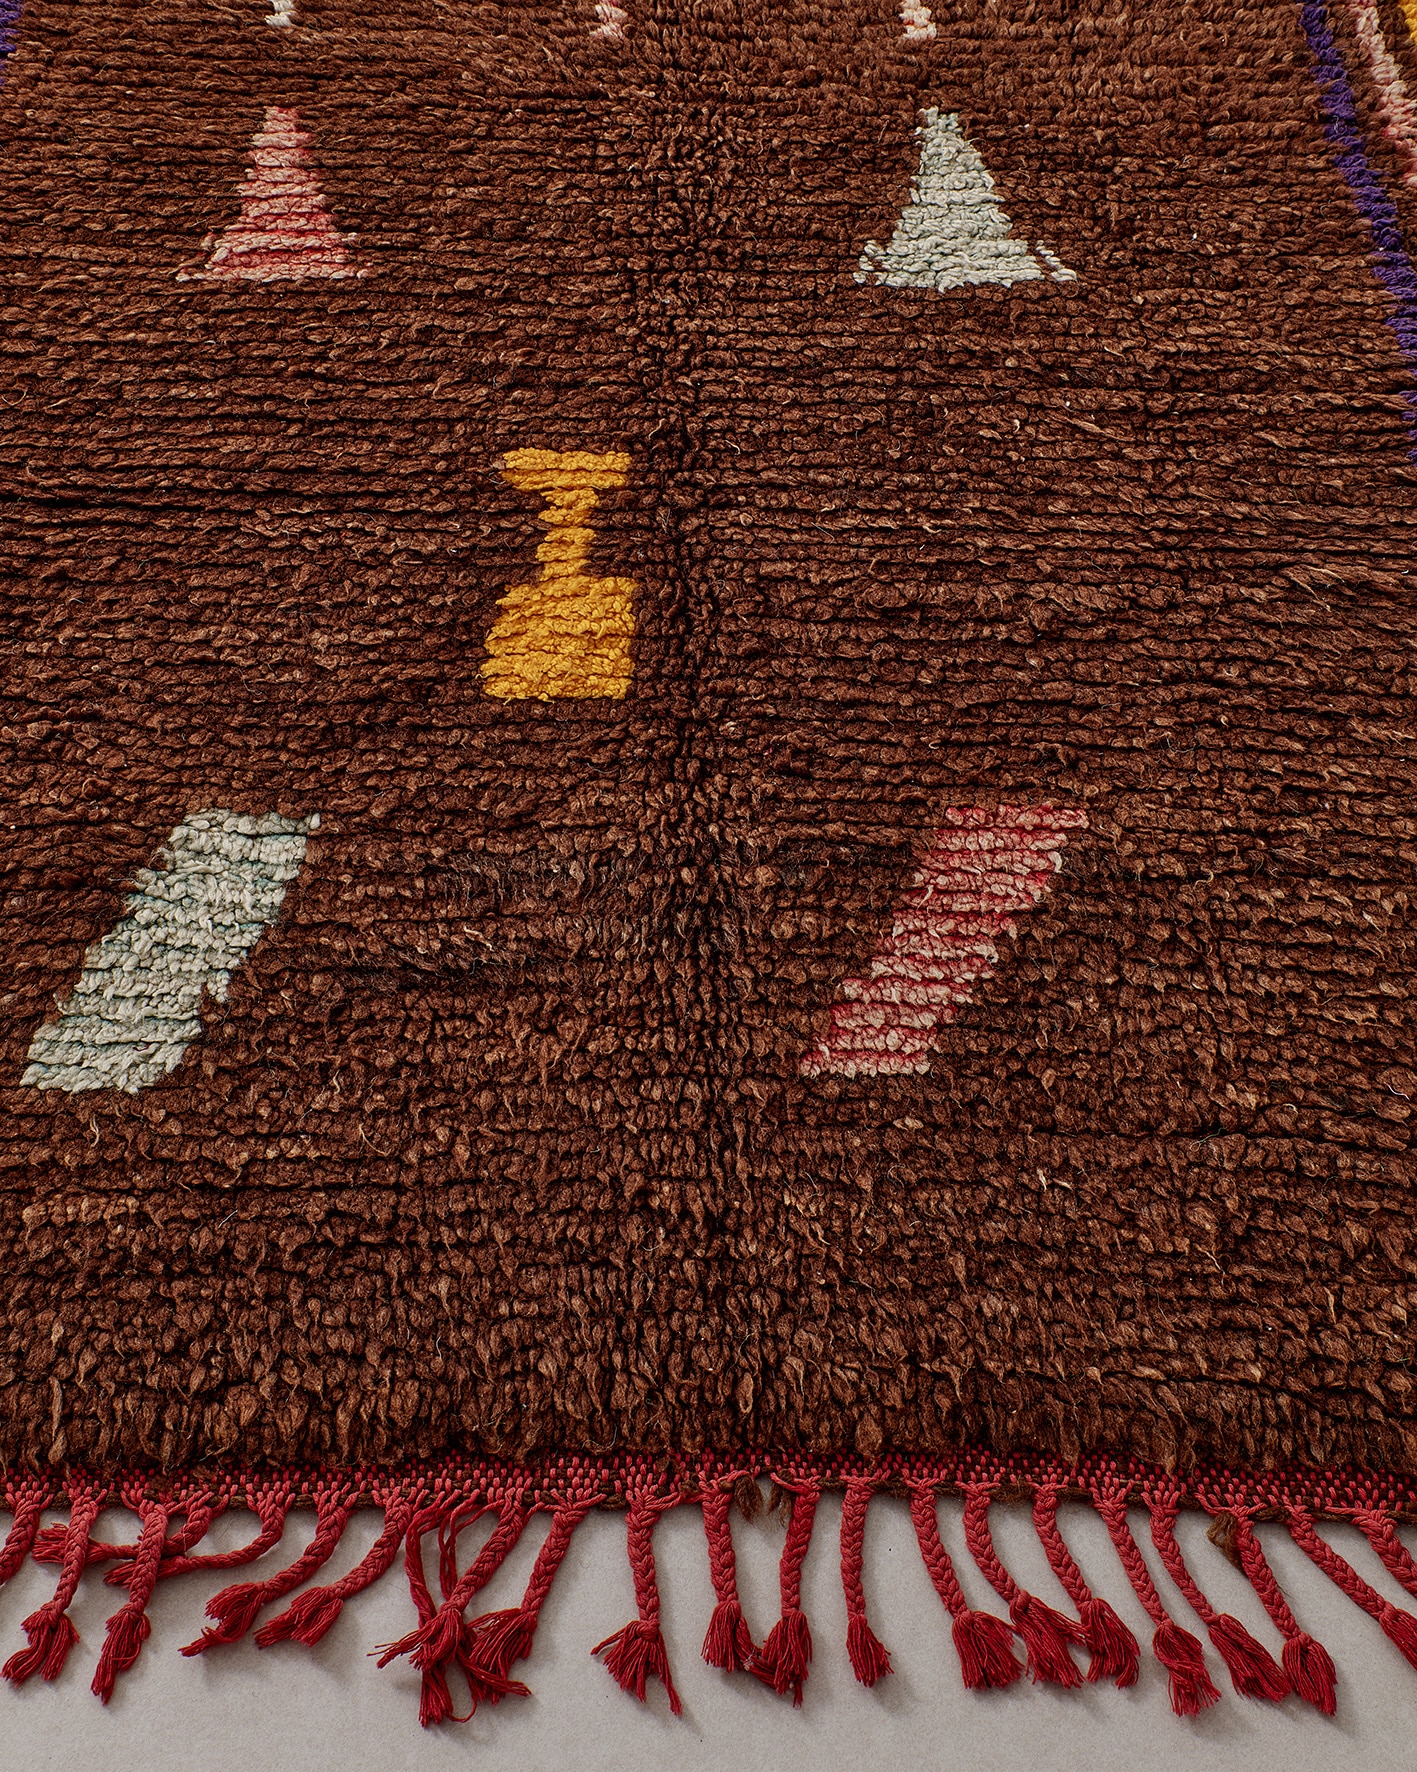 Brown rug with small pastel pictograms, fringes